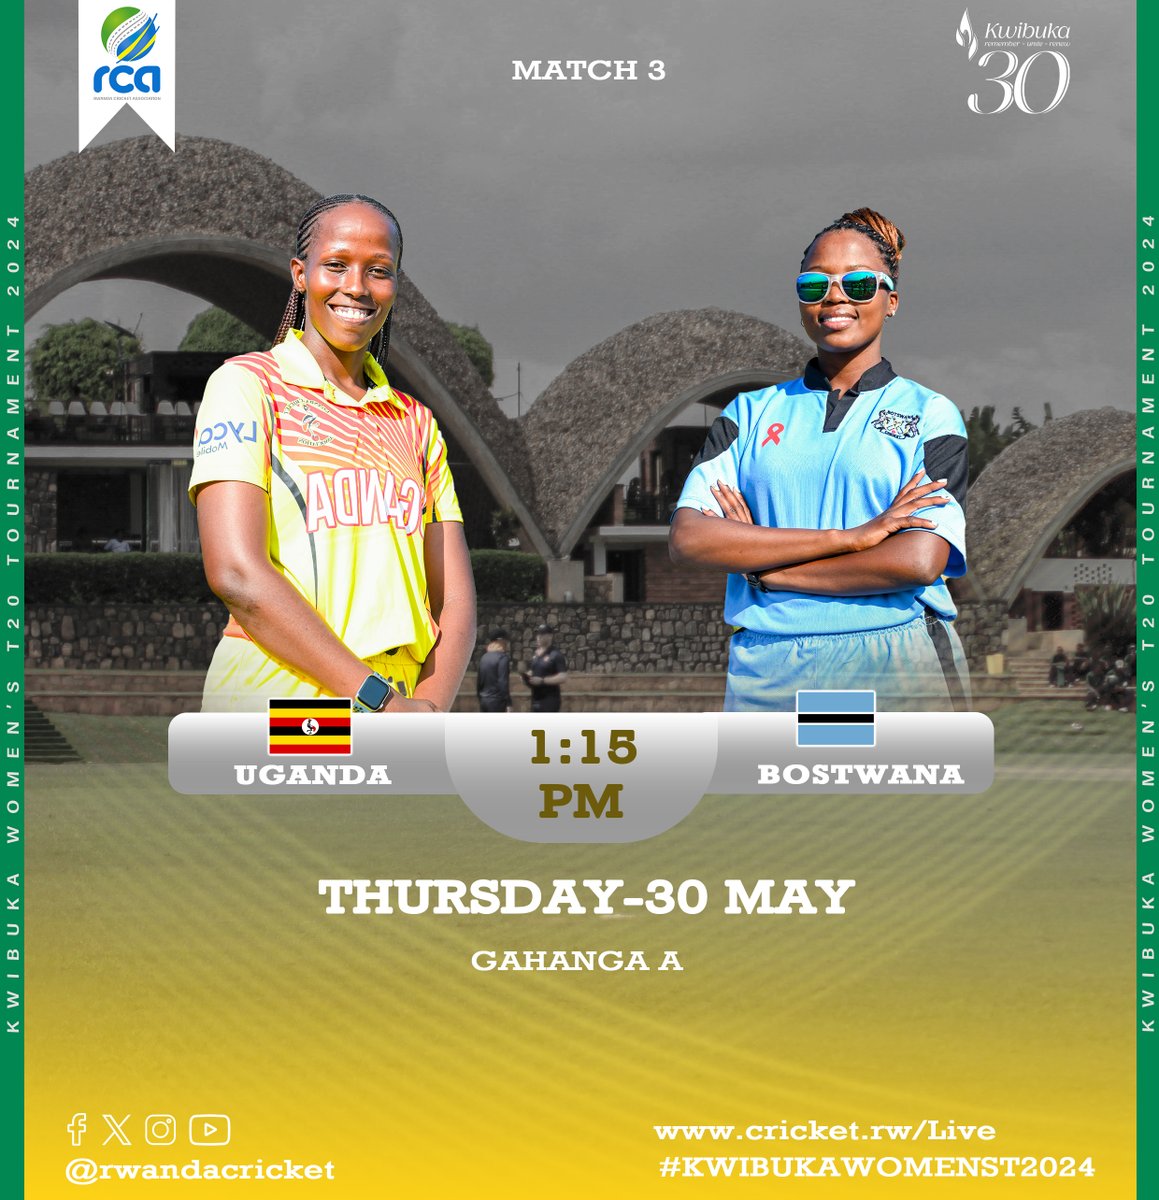 🏏 Kwibuka Cricket 2024 - Third Game Announcement 🏏

Match:🇺🇬 Uganda Women vs. 🇧🇼 Botswana Women 📍 Ground A 🕐 1:15 PM
Get ready for more thrilling cricket action this afternoon!
#KwibukaCricket2024 #UgandaVsBotswana #CricketForAll #LiveCricket